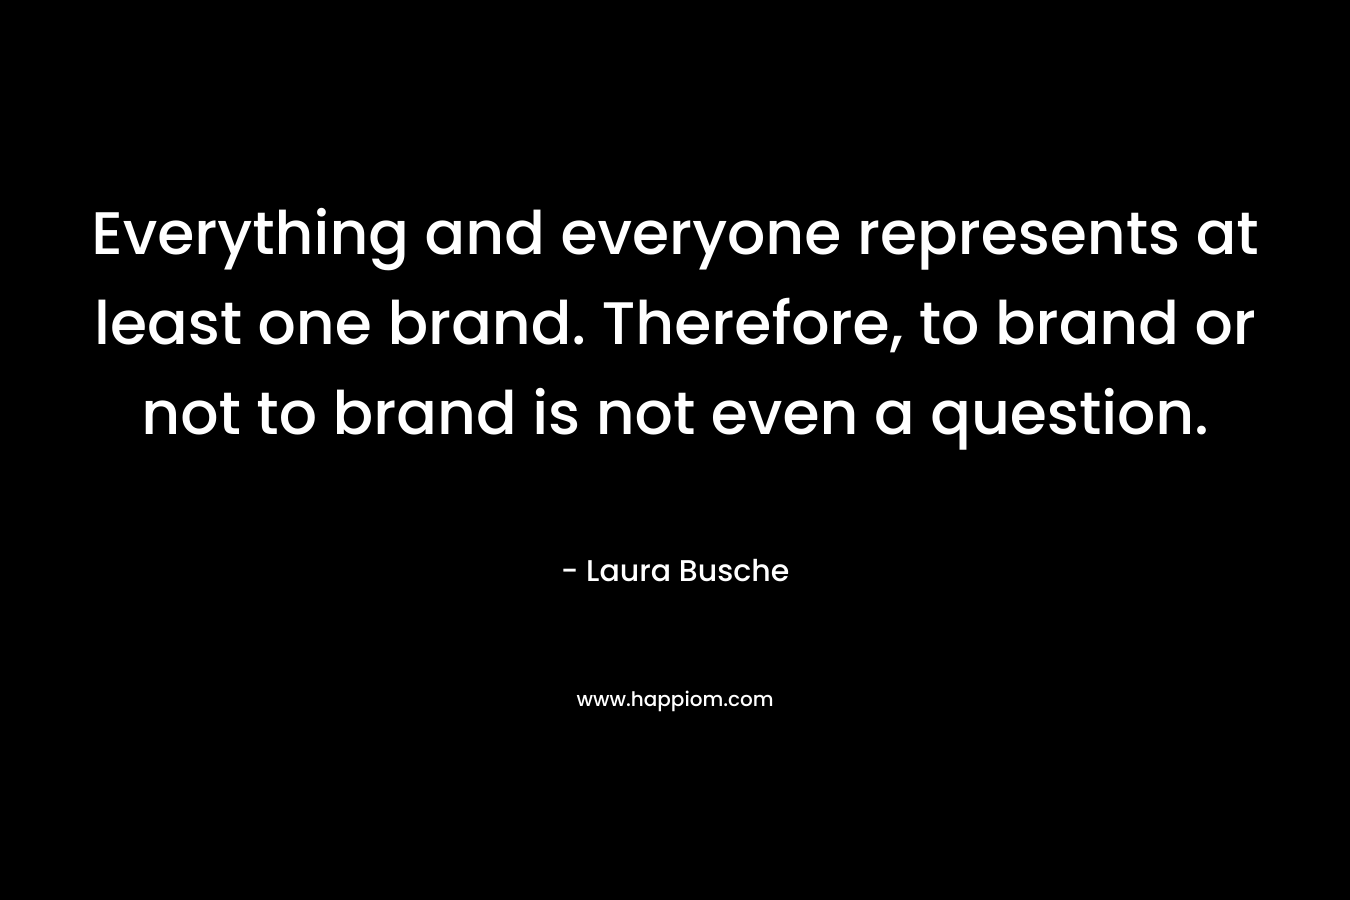 Everything and everyone represents at least one brand. Therefore, to brand or not to brand is not even a question.